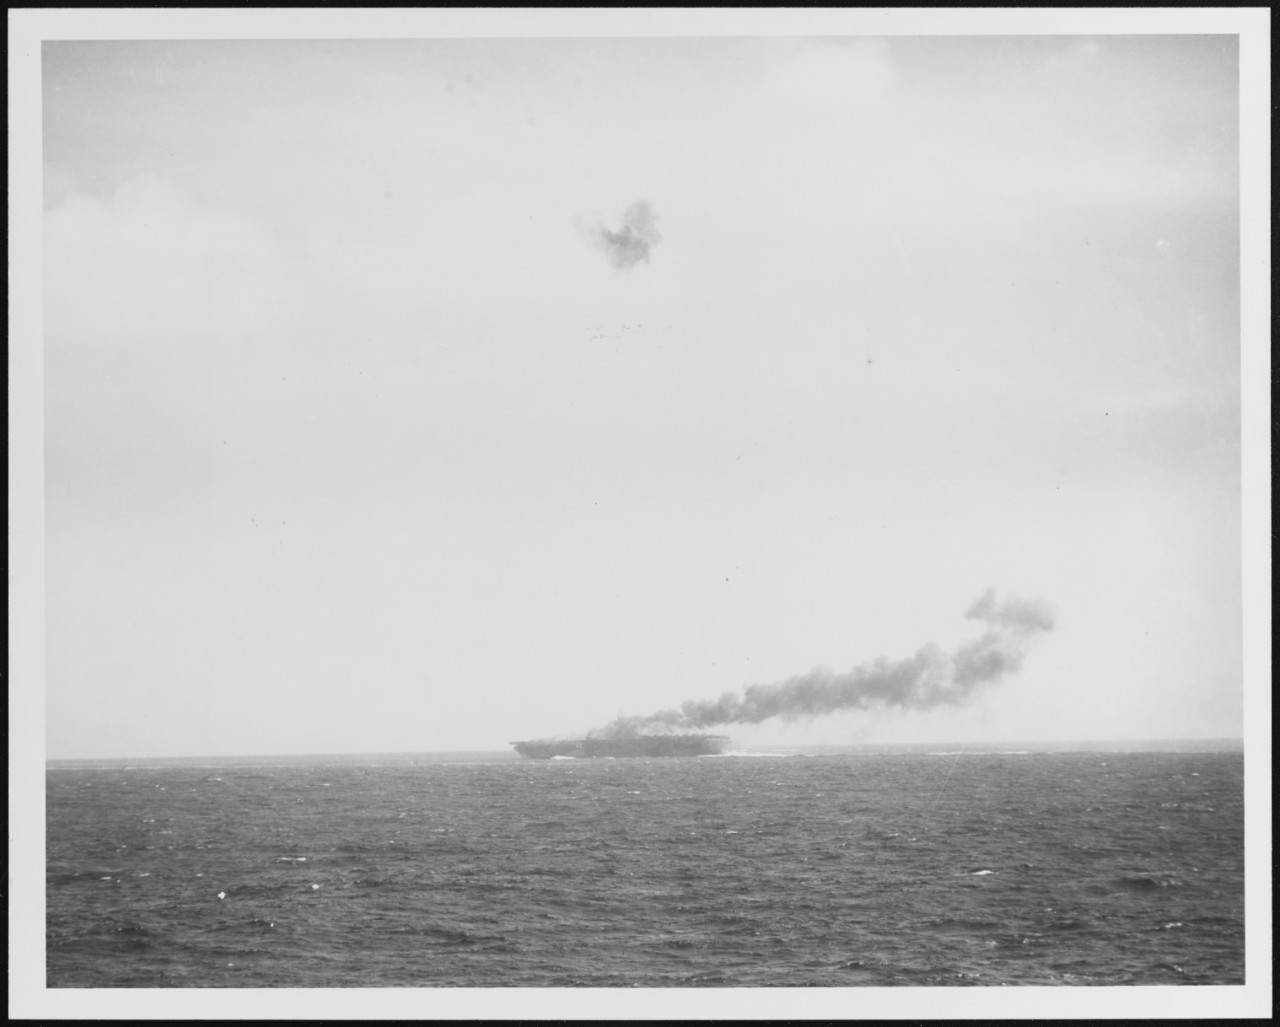 Burning carrier, the result of a Japanese Kamikaze attack.